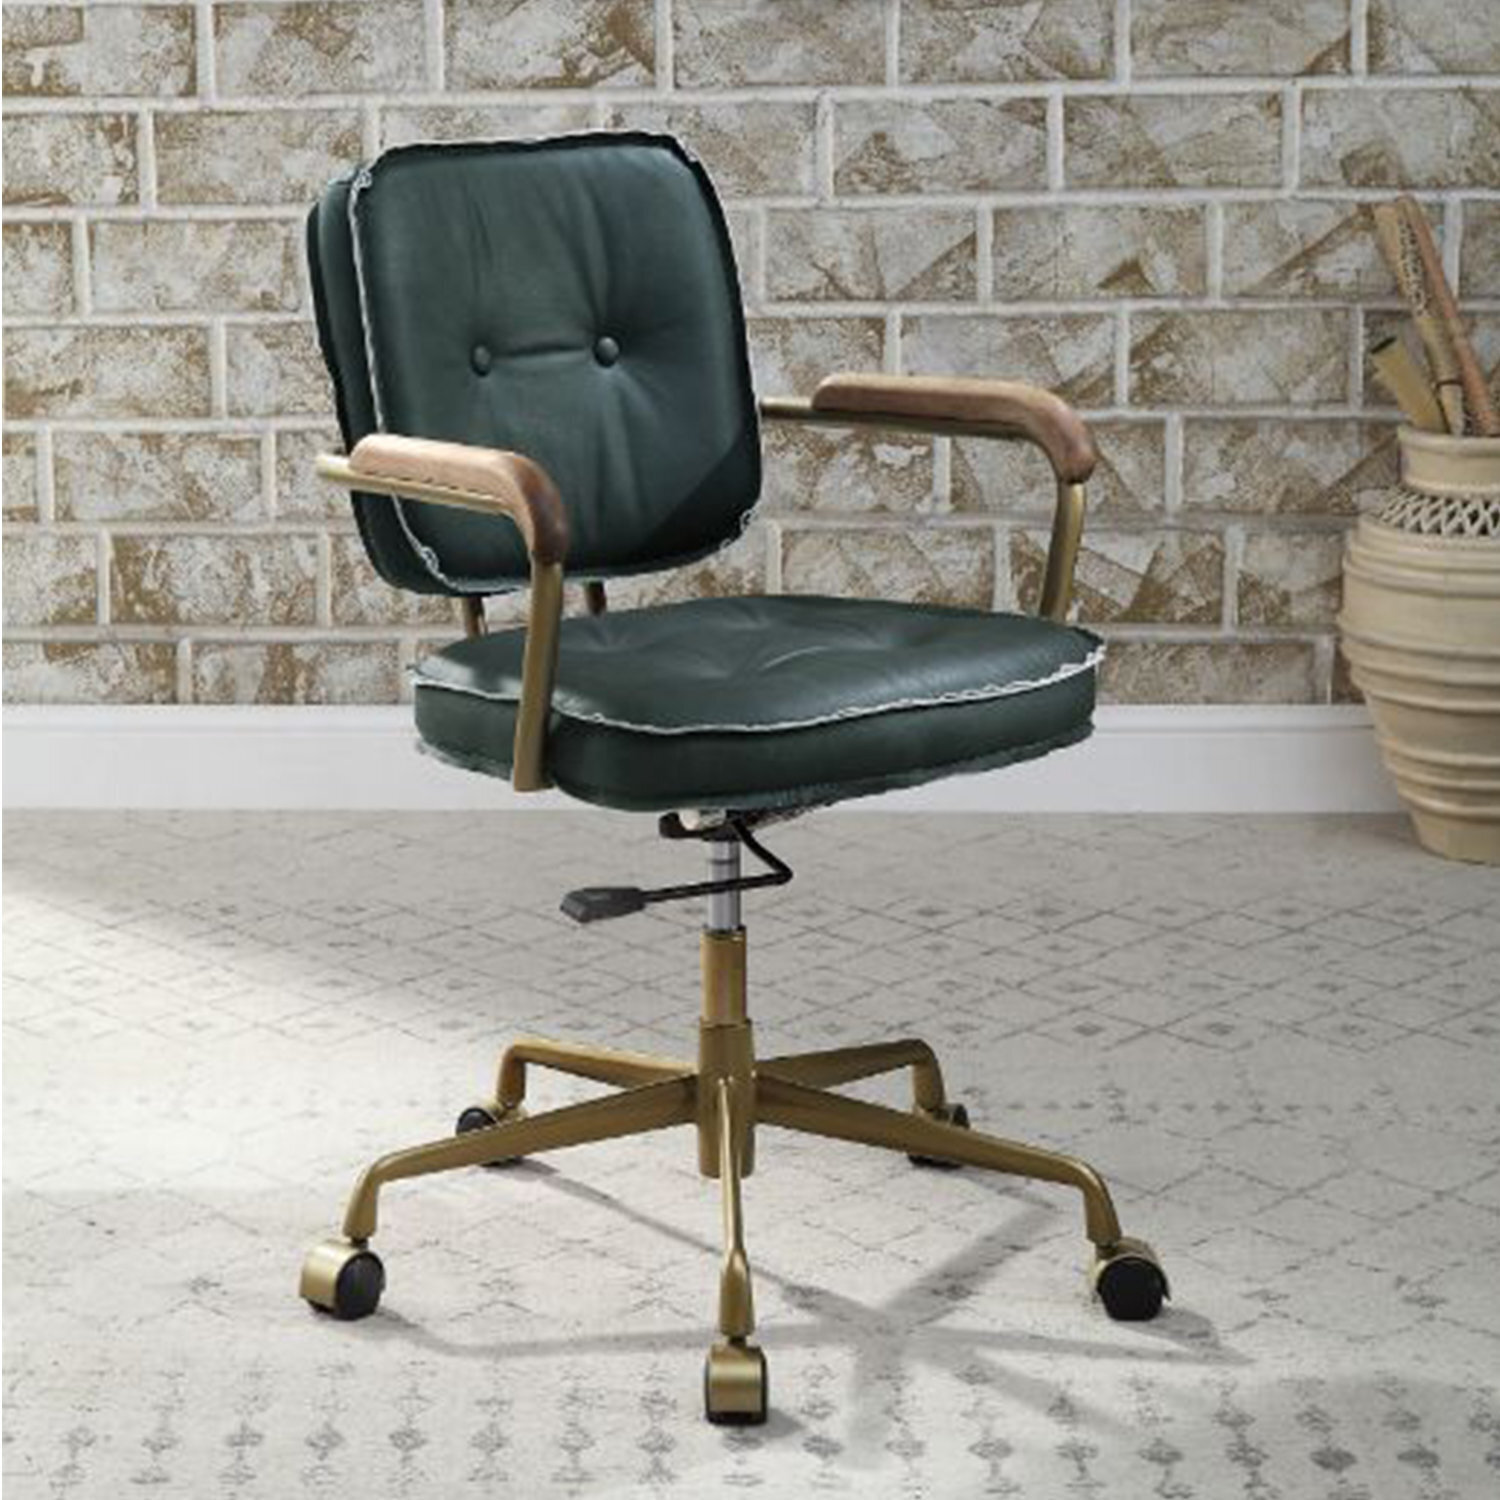 Height adjustable green leather office chair